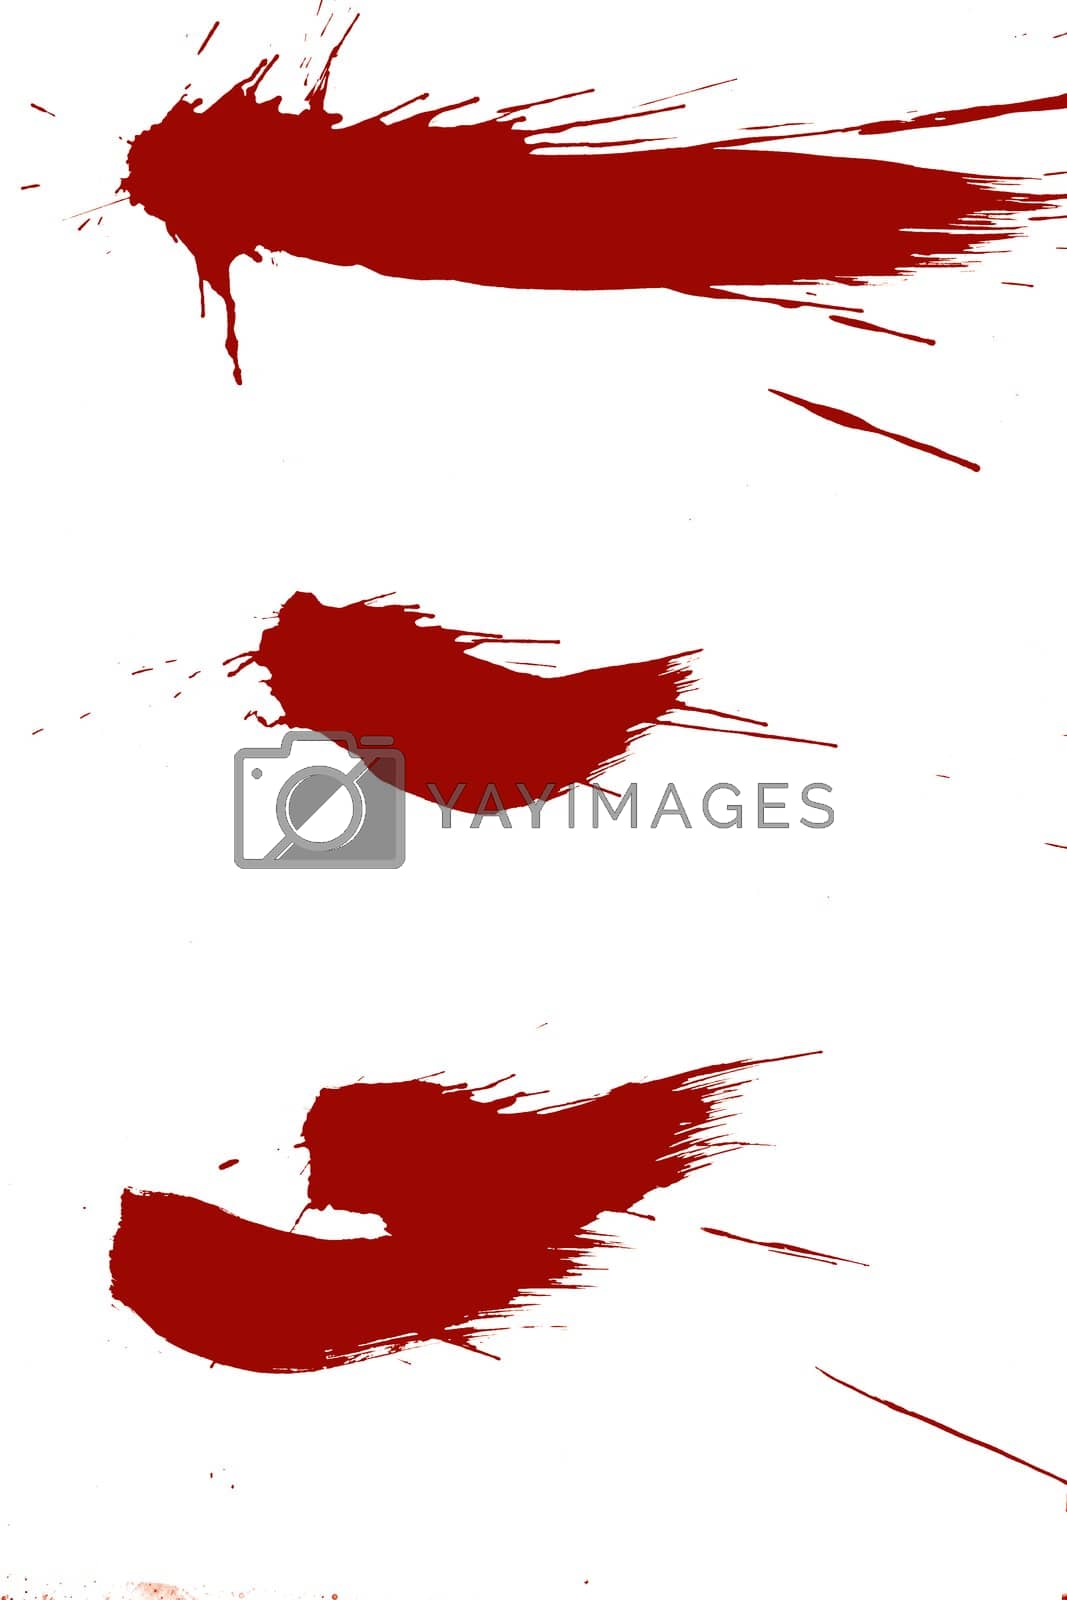 Royalty free image of grunge ink by Yellowj